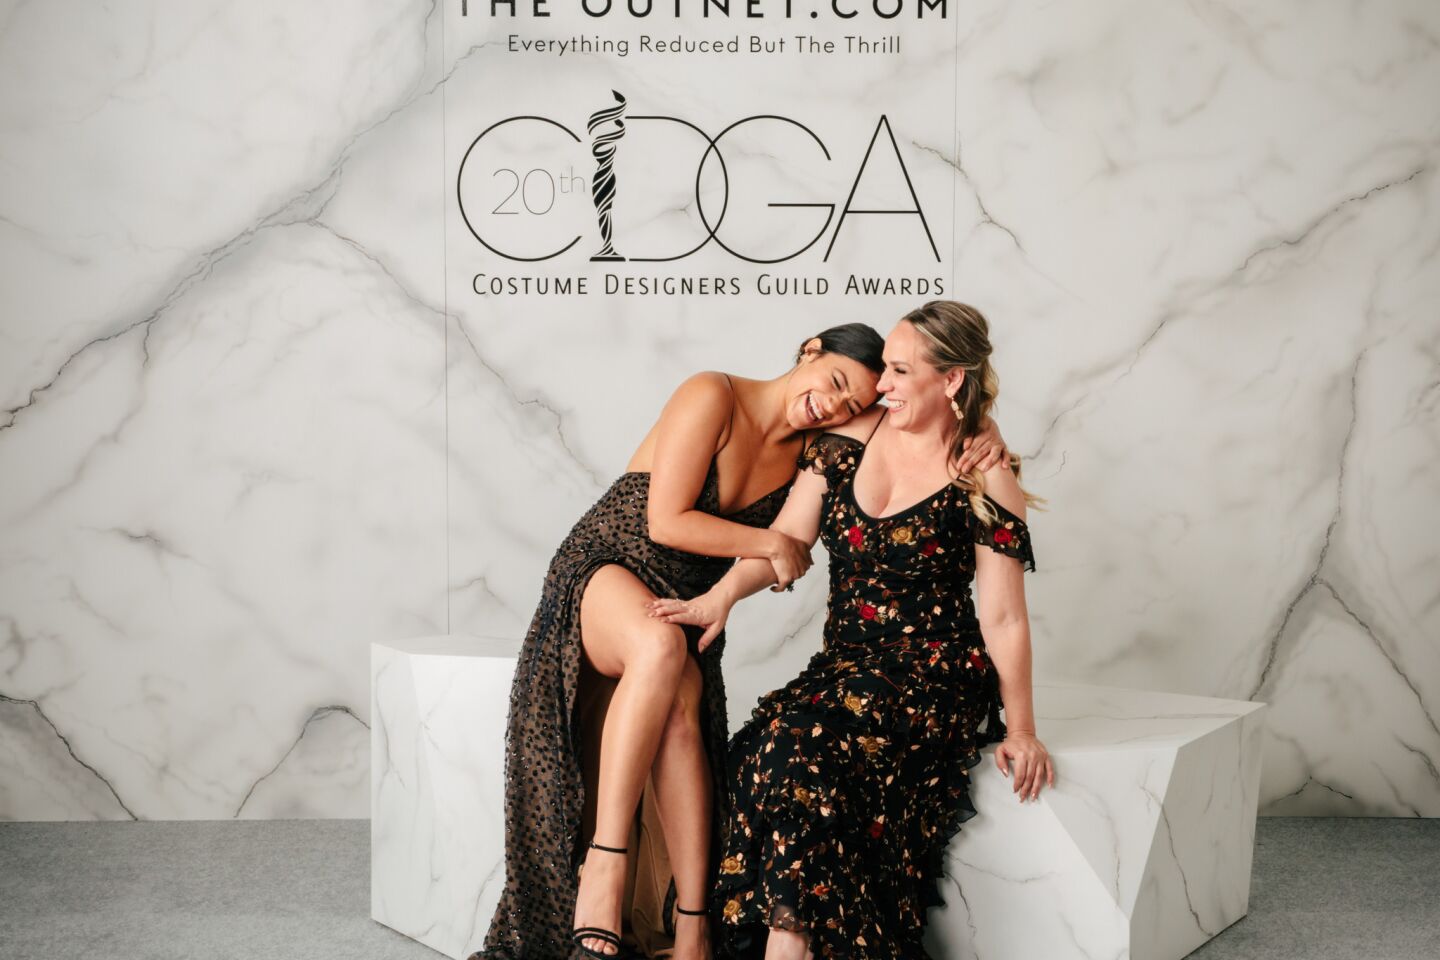 Exclusive portraits from the Costume Designers Guild Awards